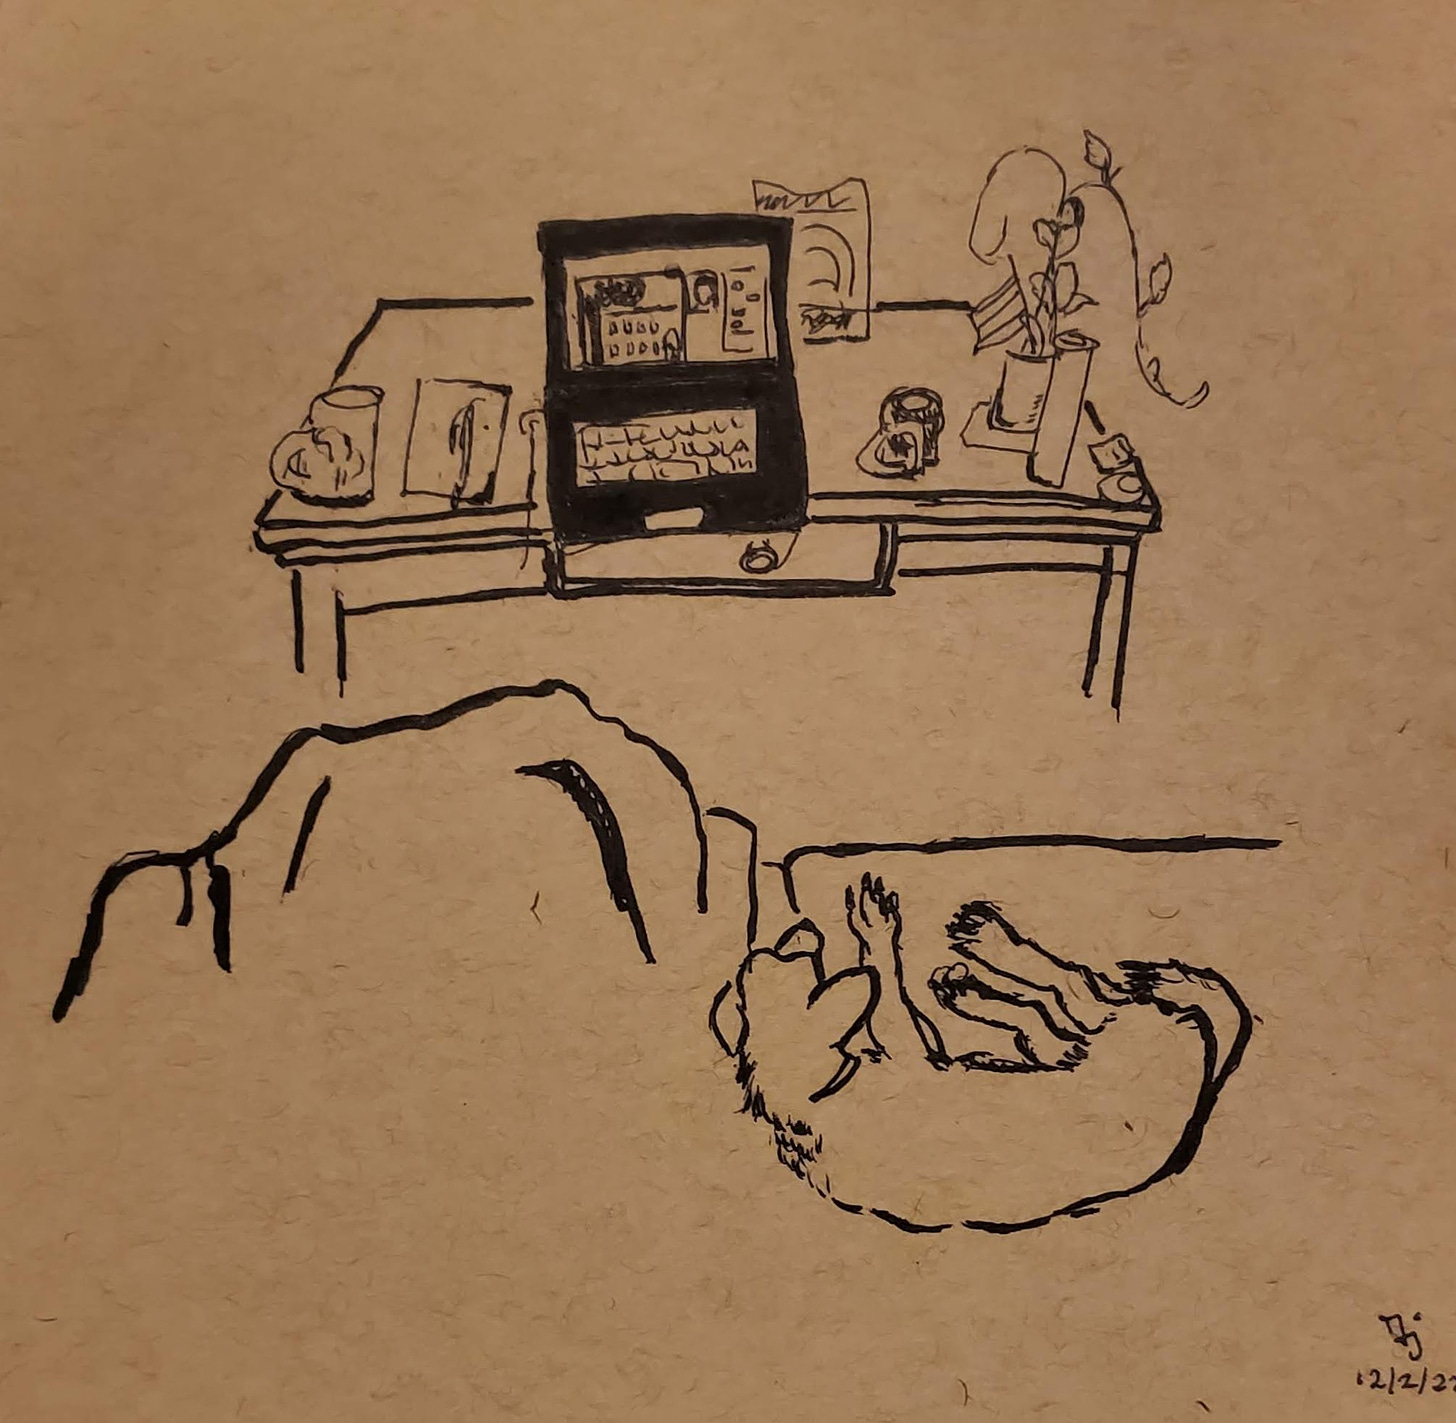 Sketch in black ink of a laptop displaying a small building. The laptop is on a coffee table in front of a figure and a dog on a couch.